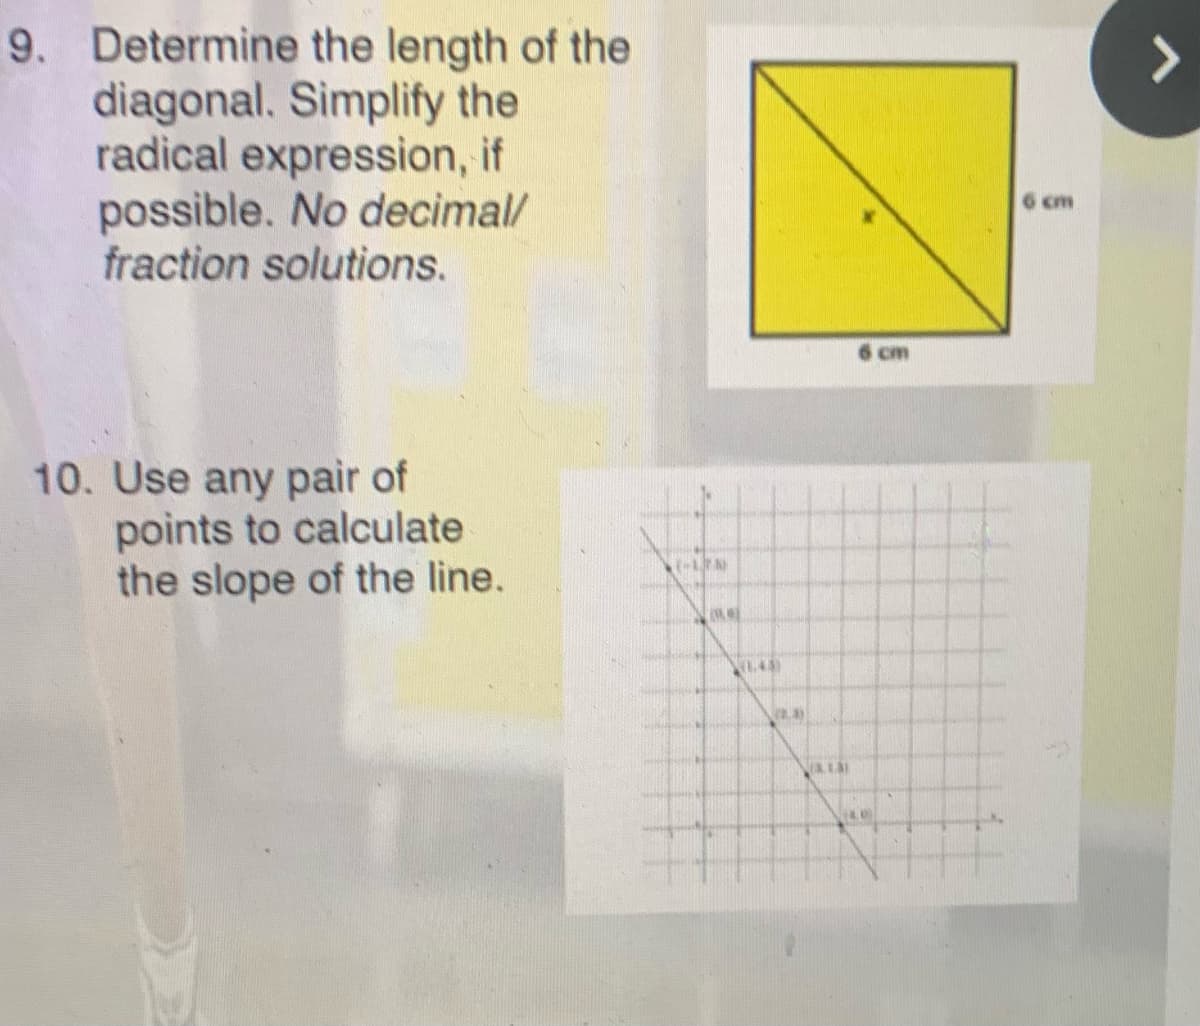 9. Determine the length of the
diagonal. Simplify the
radical expression, if
possible. No decimal/
fraction solutions.
>
6 cm
cm
10. Use any pair of
points to calculate
the slope of the line.
